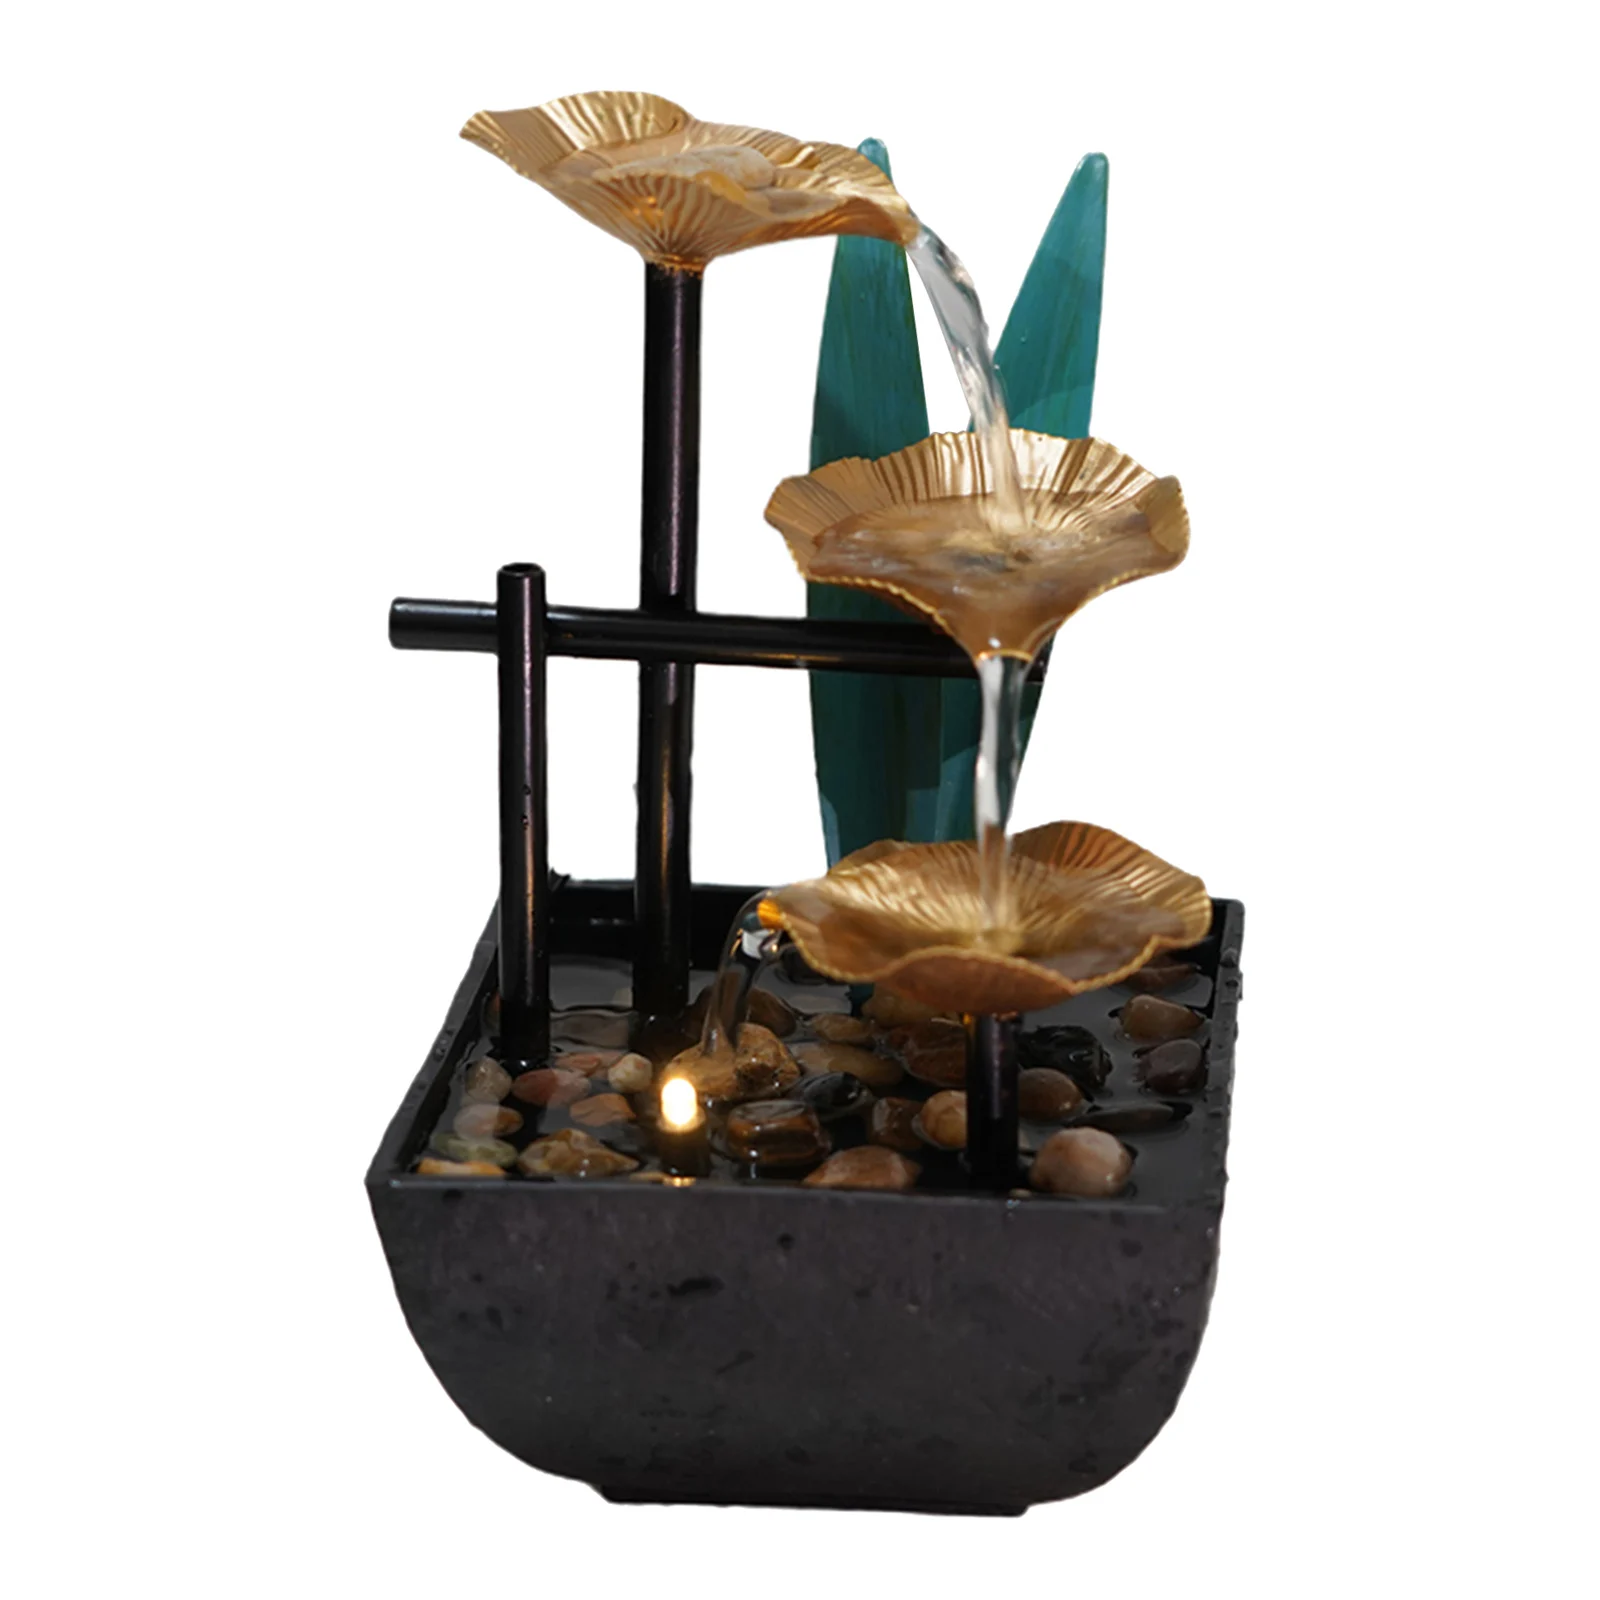 Relaxation Water Fountain Indoor Mini Waterfall for Interior Decoration, Home Tabletop Feng Shui Water Landscape